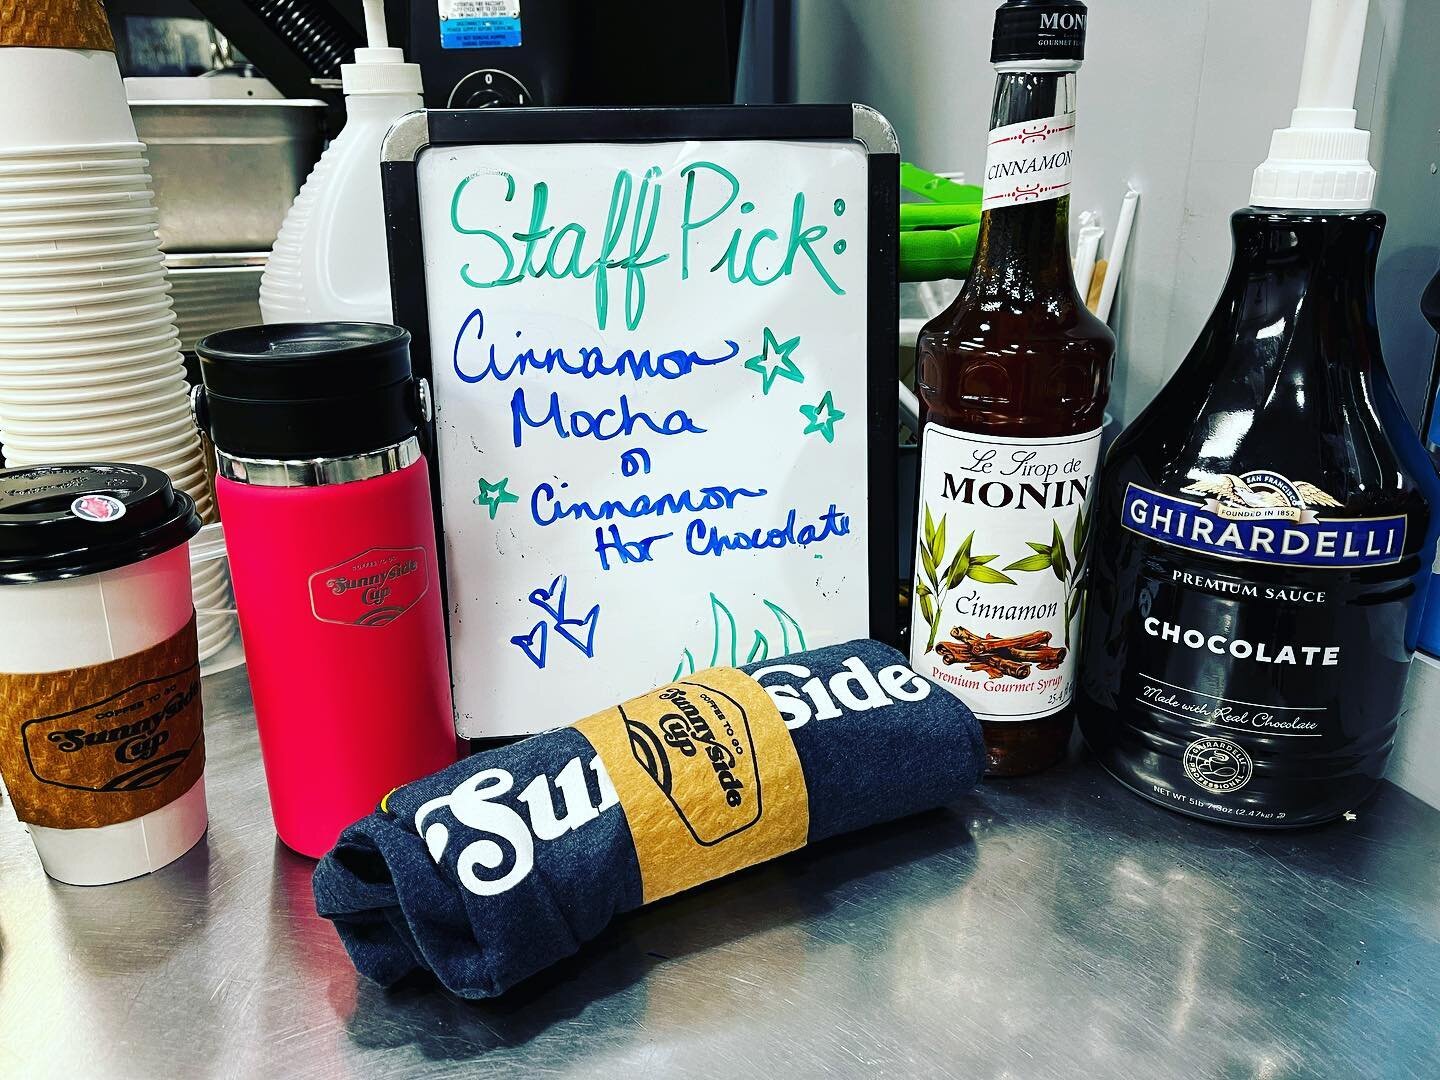 Just in time for Valentine&rsquo;s Day! Have you tried this weeks staff pick, Cinnamon Mocha Latt&eacute;?  So yummy! #supportsmallbusiness #coffee #lattelove #keeponthesunnyside #valentines